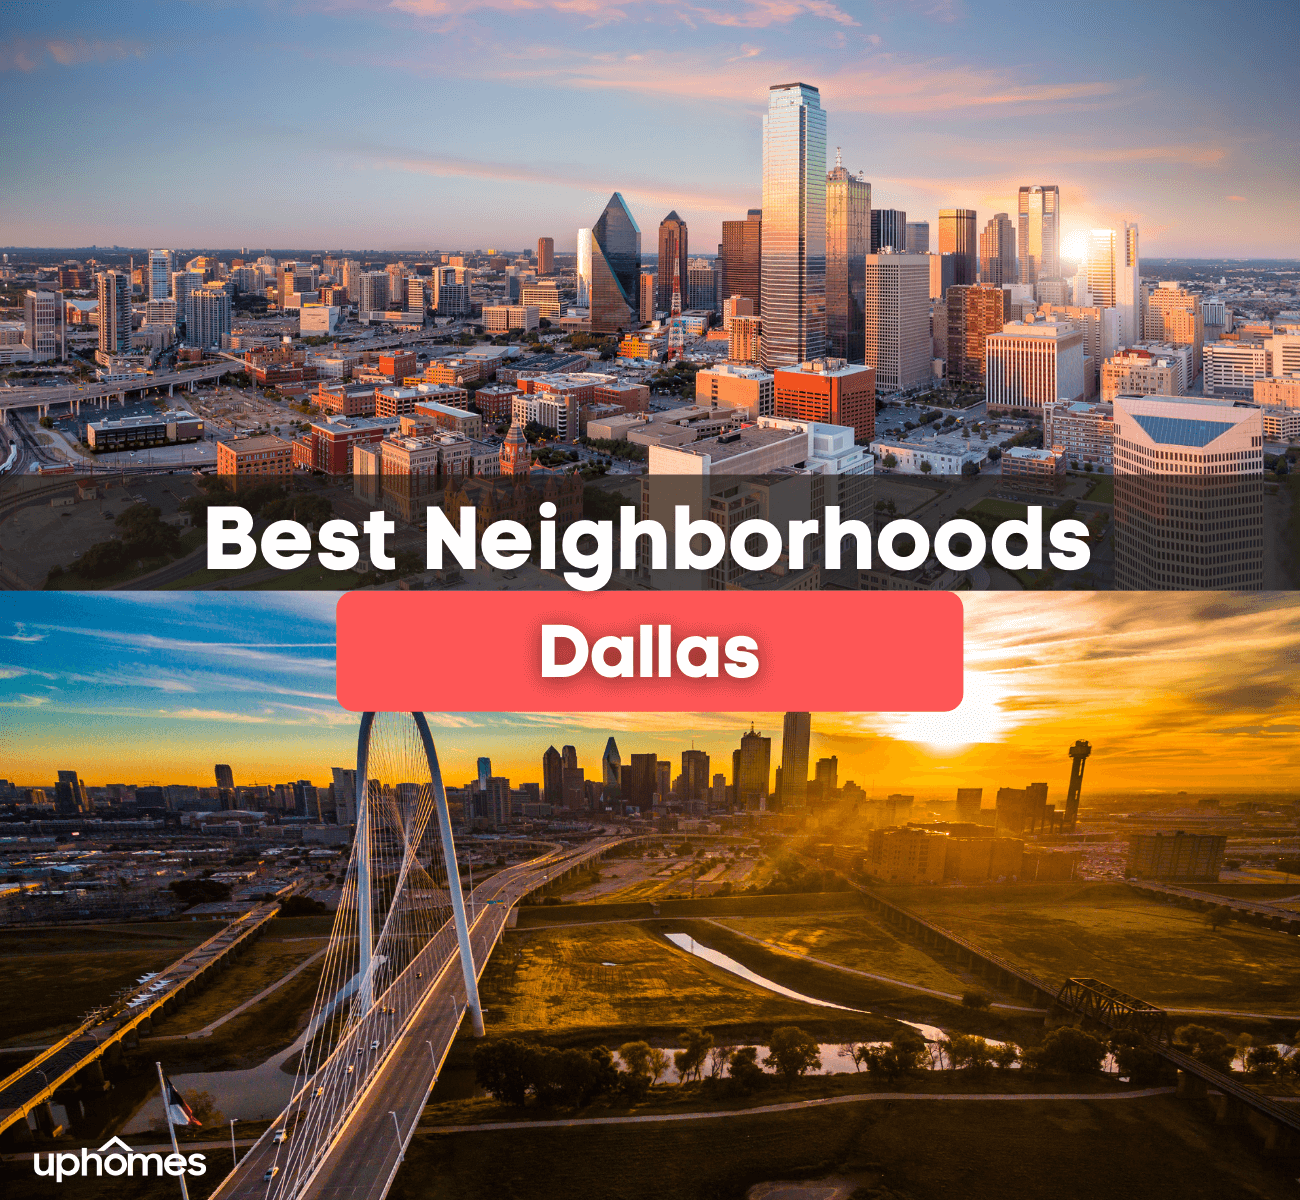 Best Neighborhoods in Dallas, TX - What are the best places to live in Dallas?